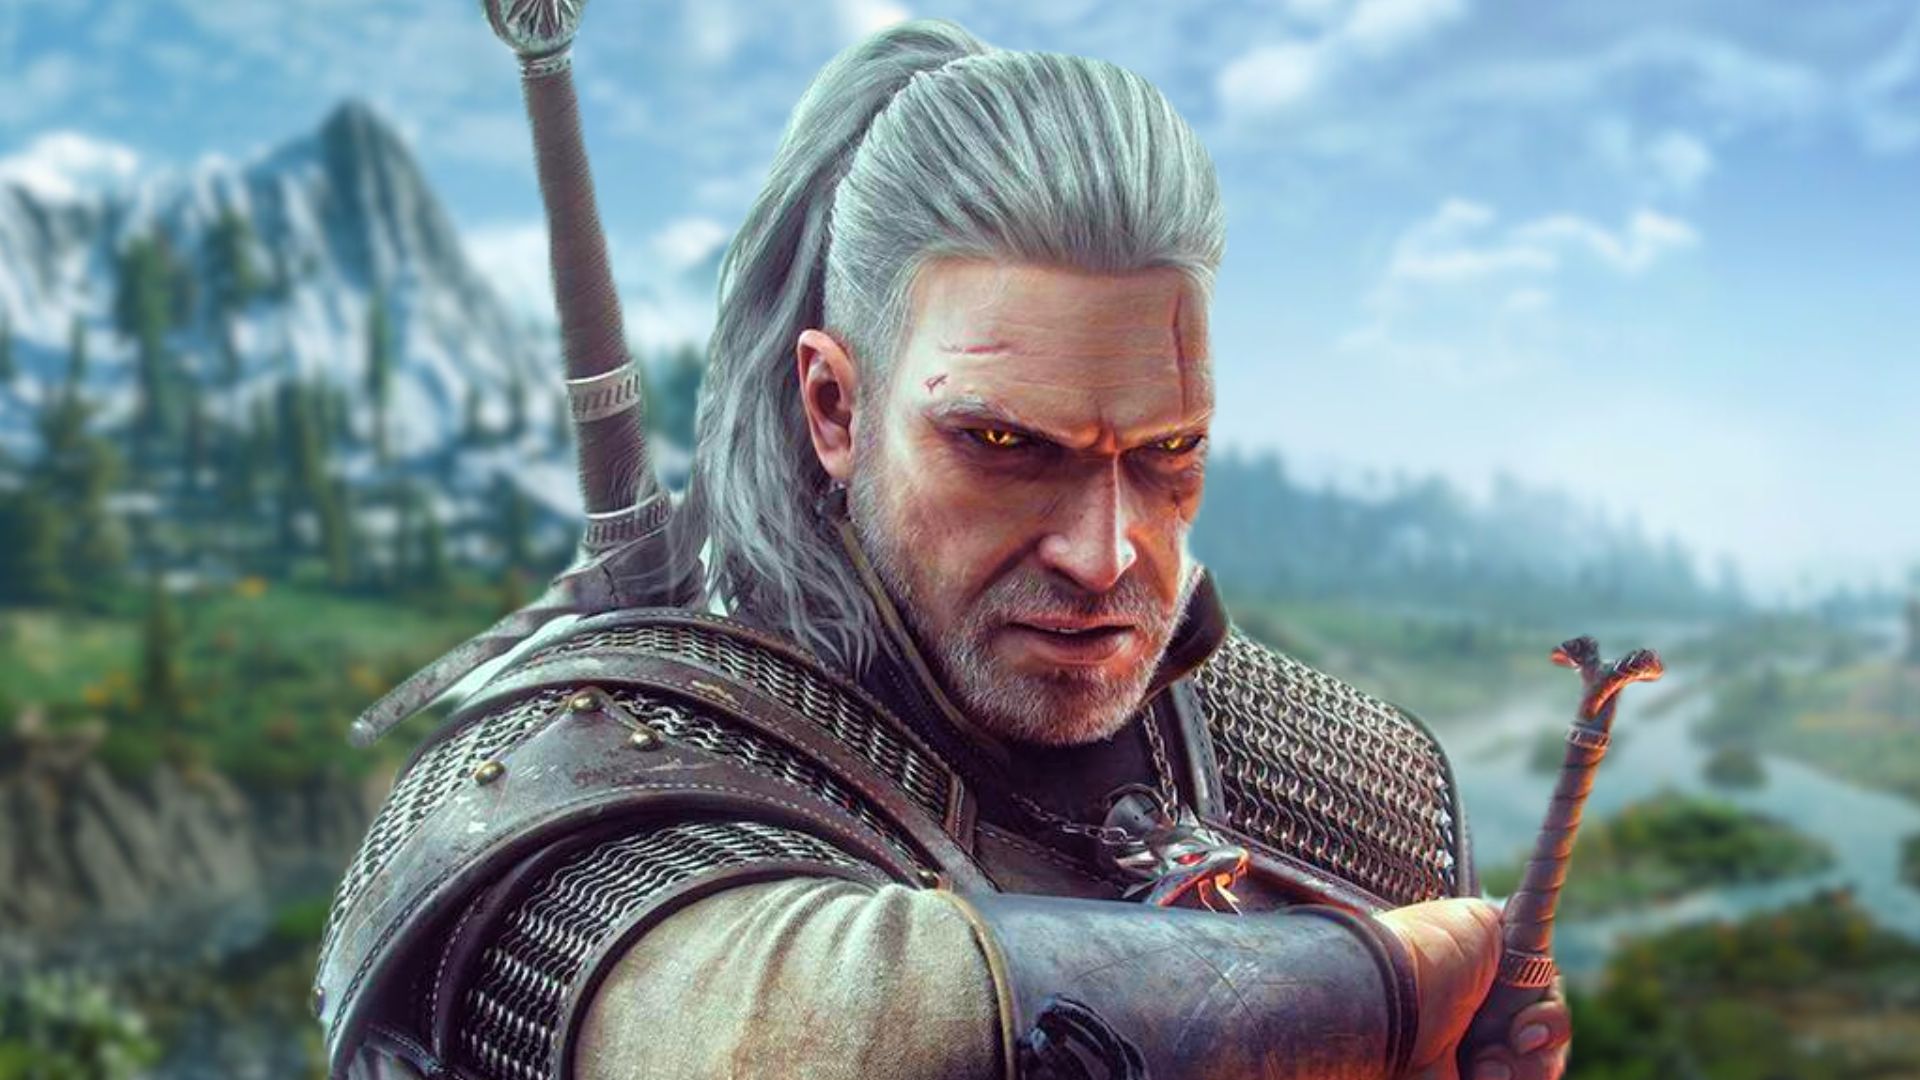 The Witcher 3 mod tools are finally on Steam for anyone to craft with